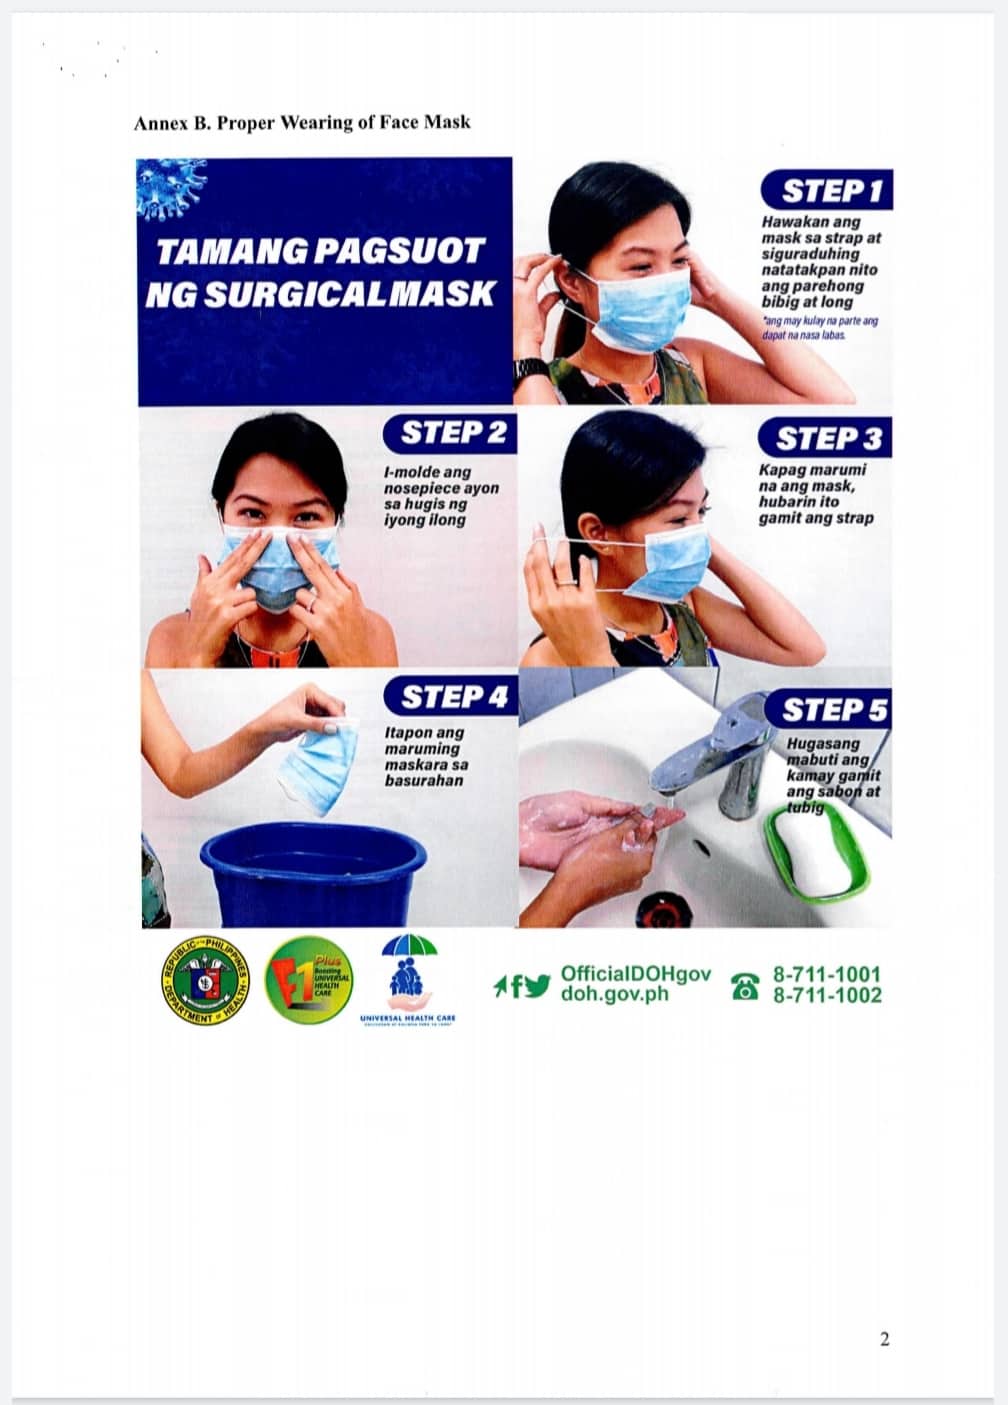 Illustration on how to use face mask